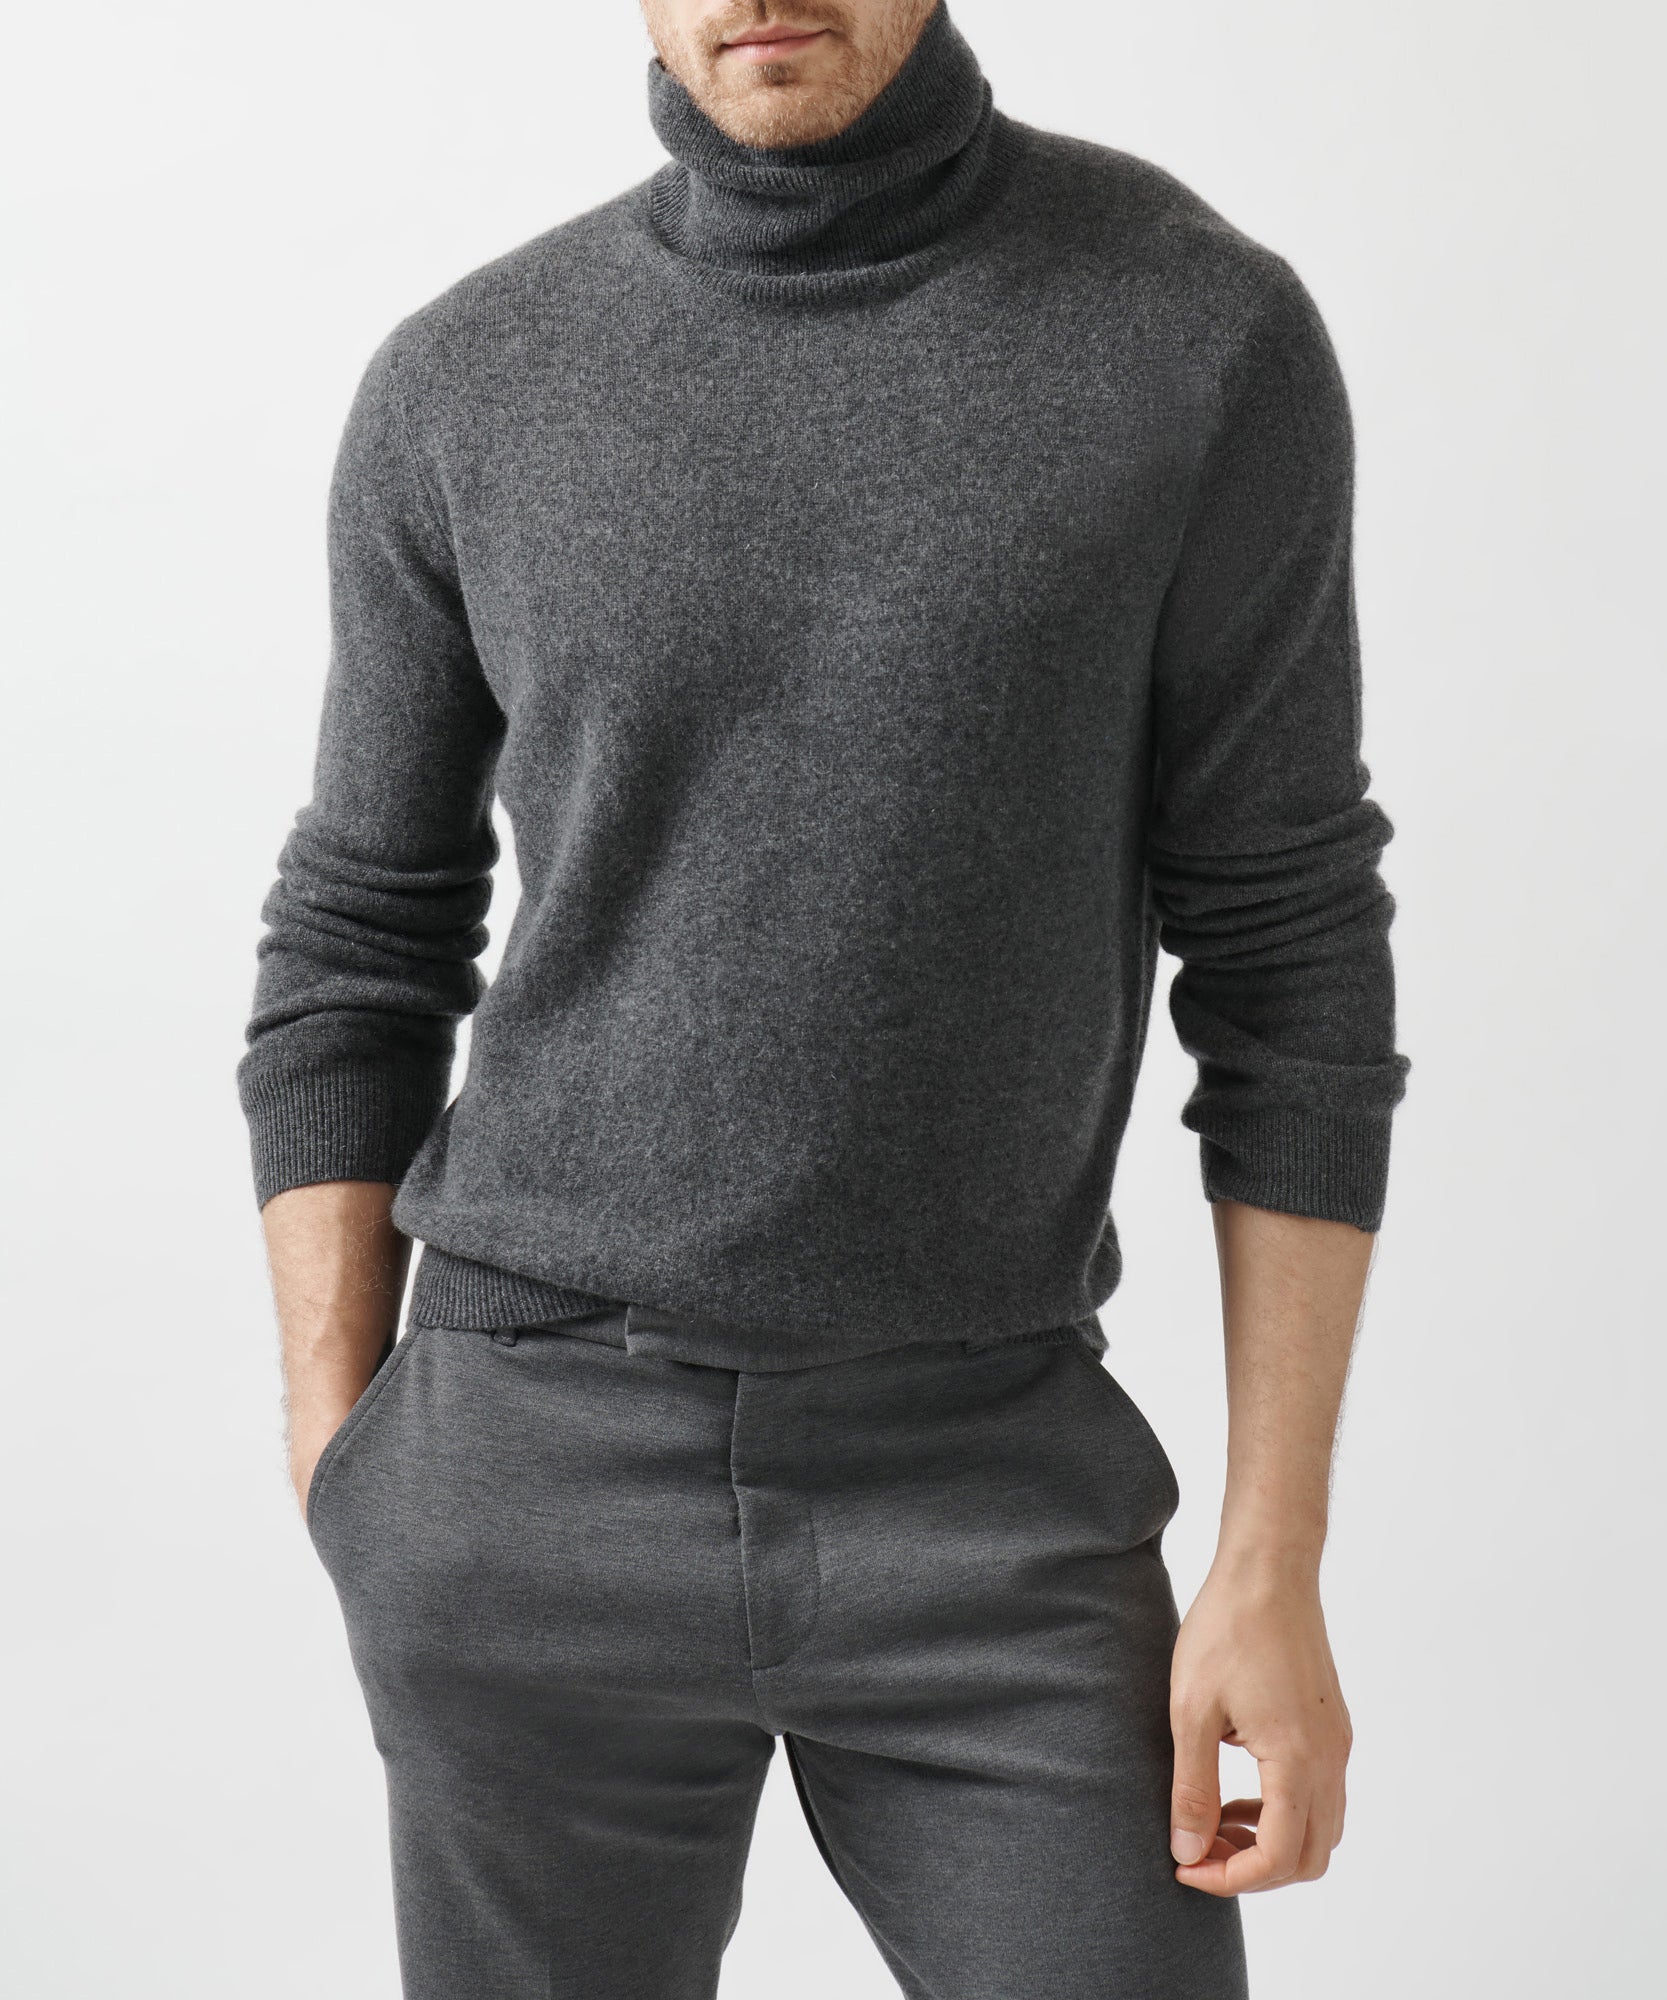 Recycled Cashmere Turtleneck Sweater - Heather Charcoal